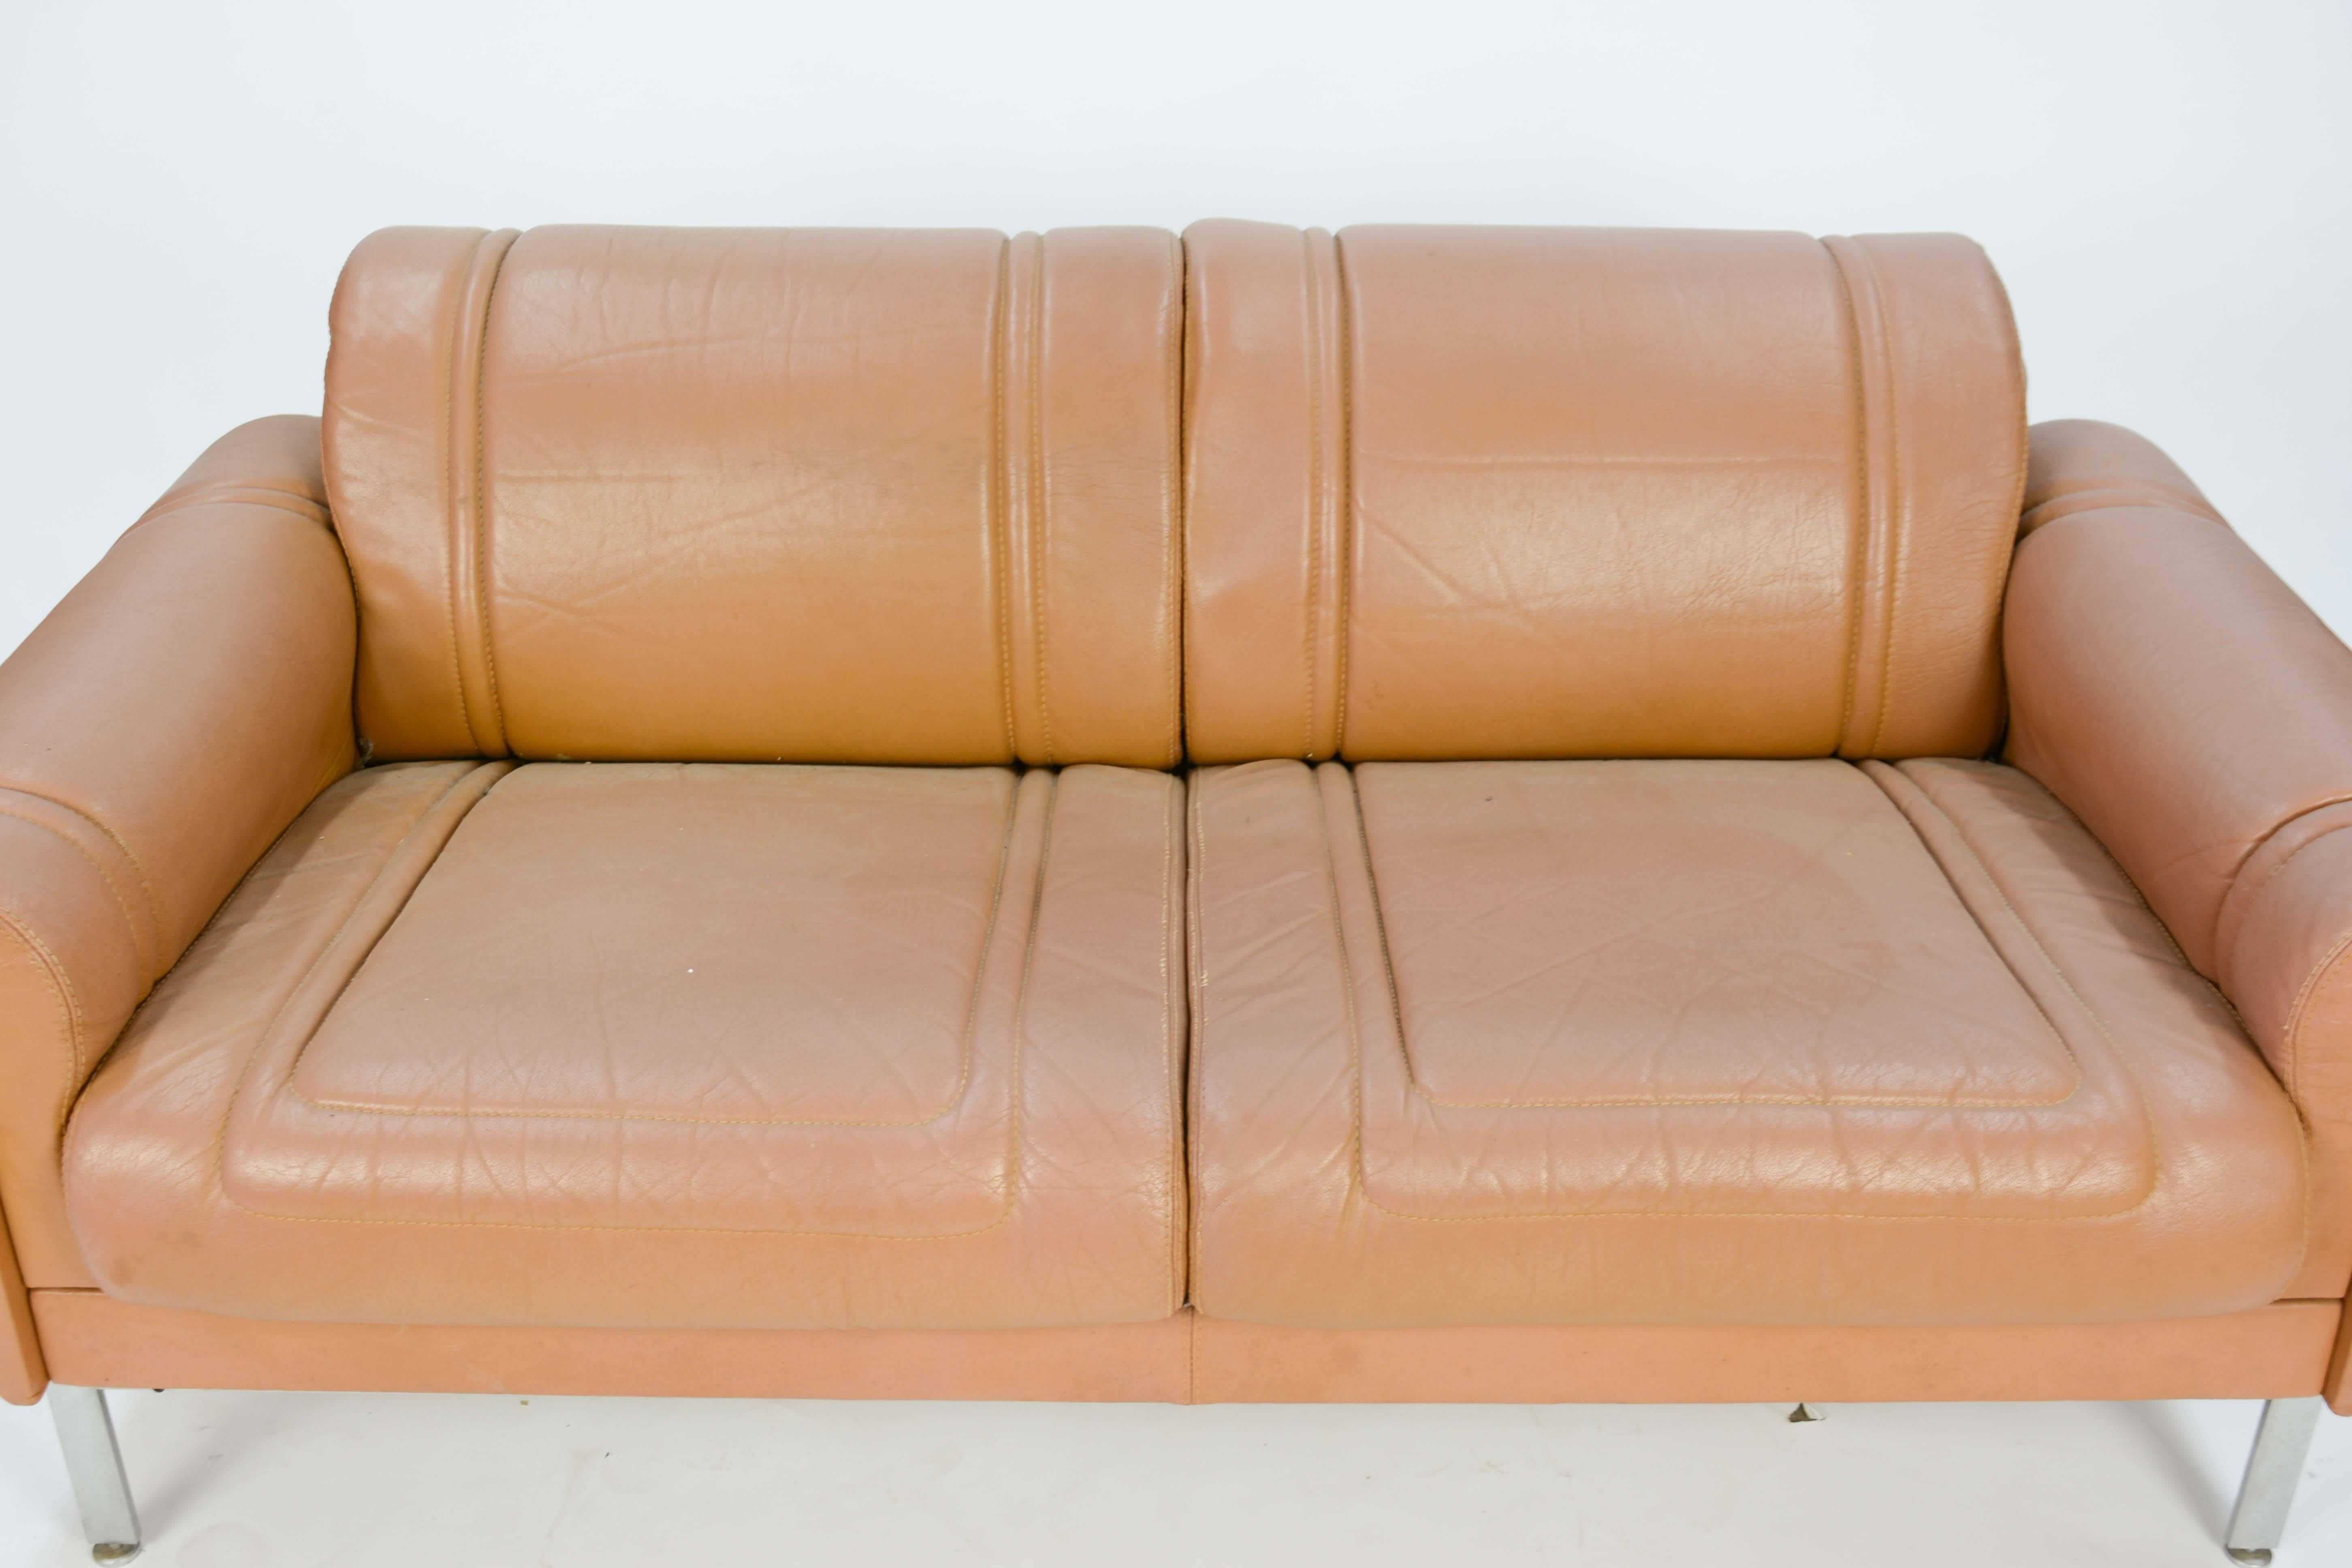 French Pair of Maison Jansen Loveseats in Distressed Buffalo Leather